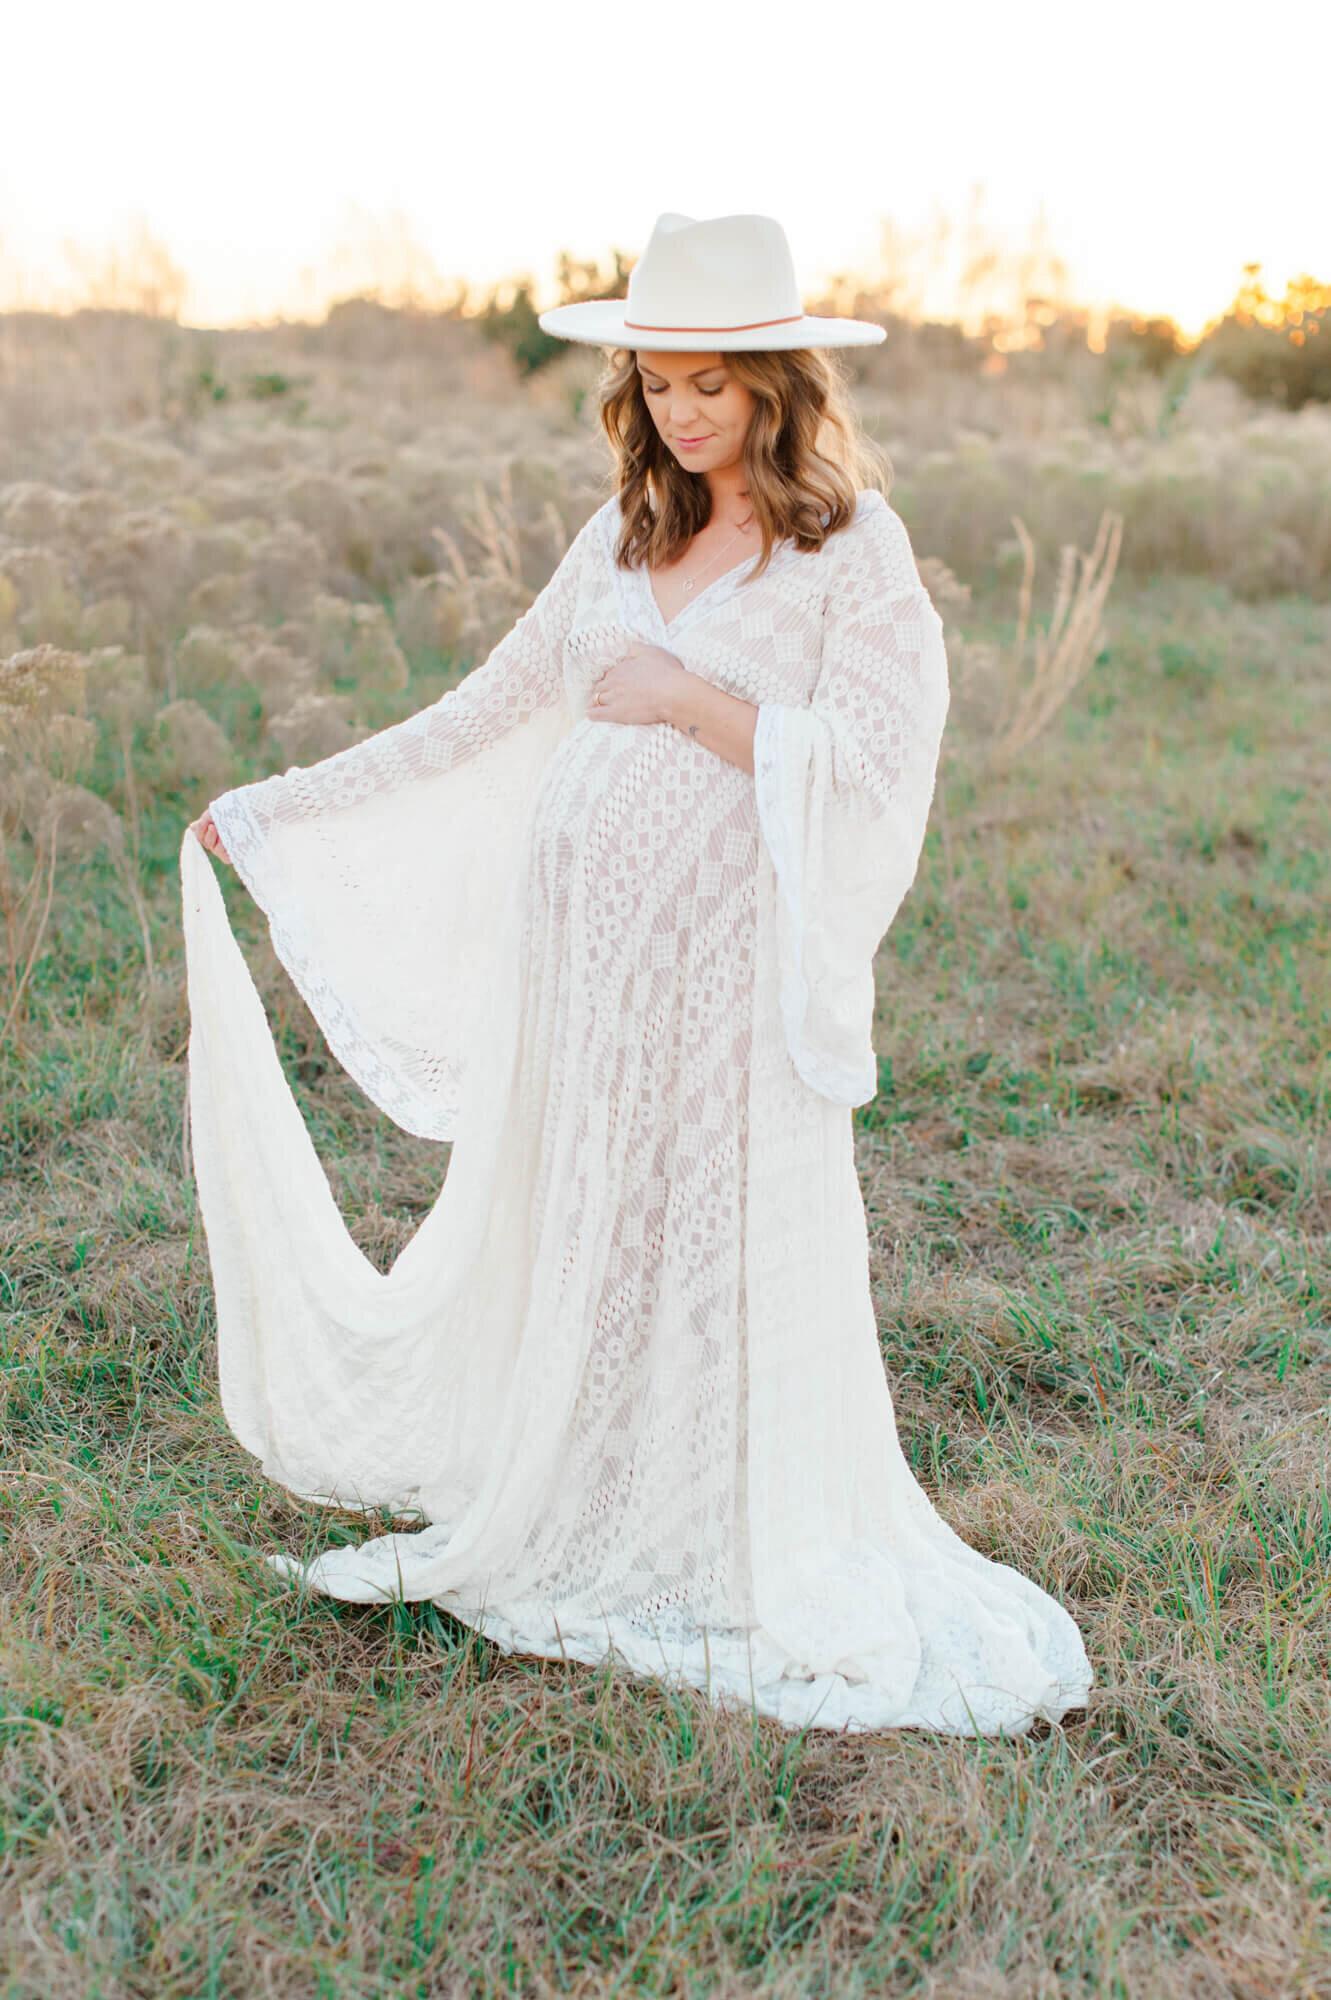 Pregnant mother holding her belly and standing in a white lace gown waving it in a tall grass field